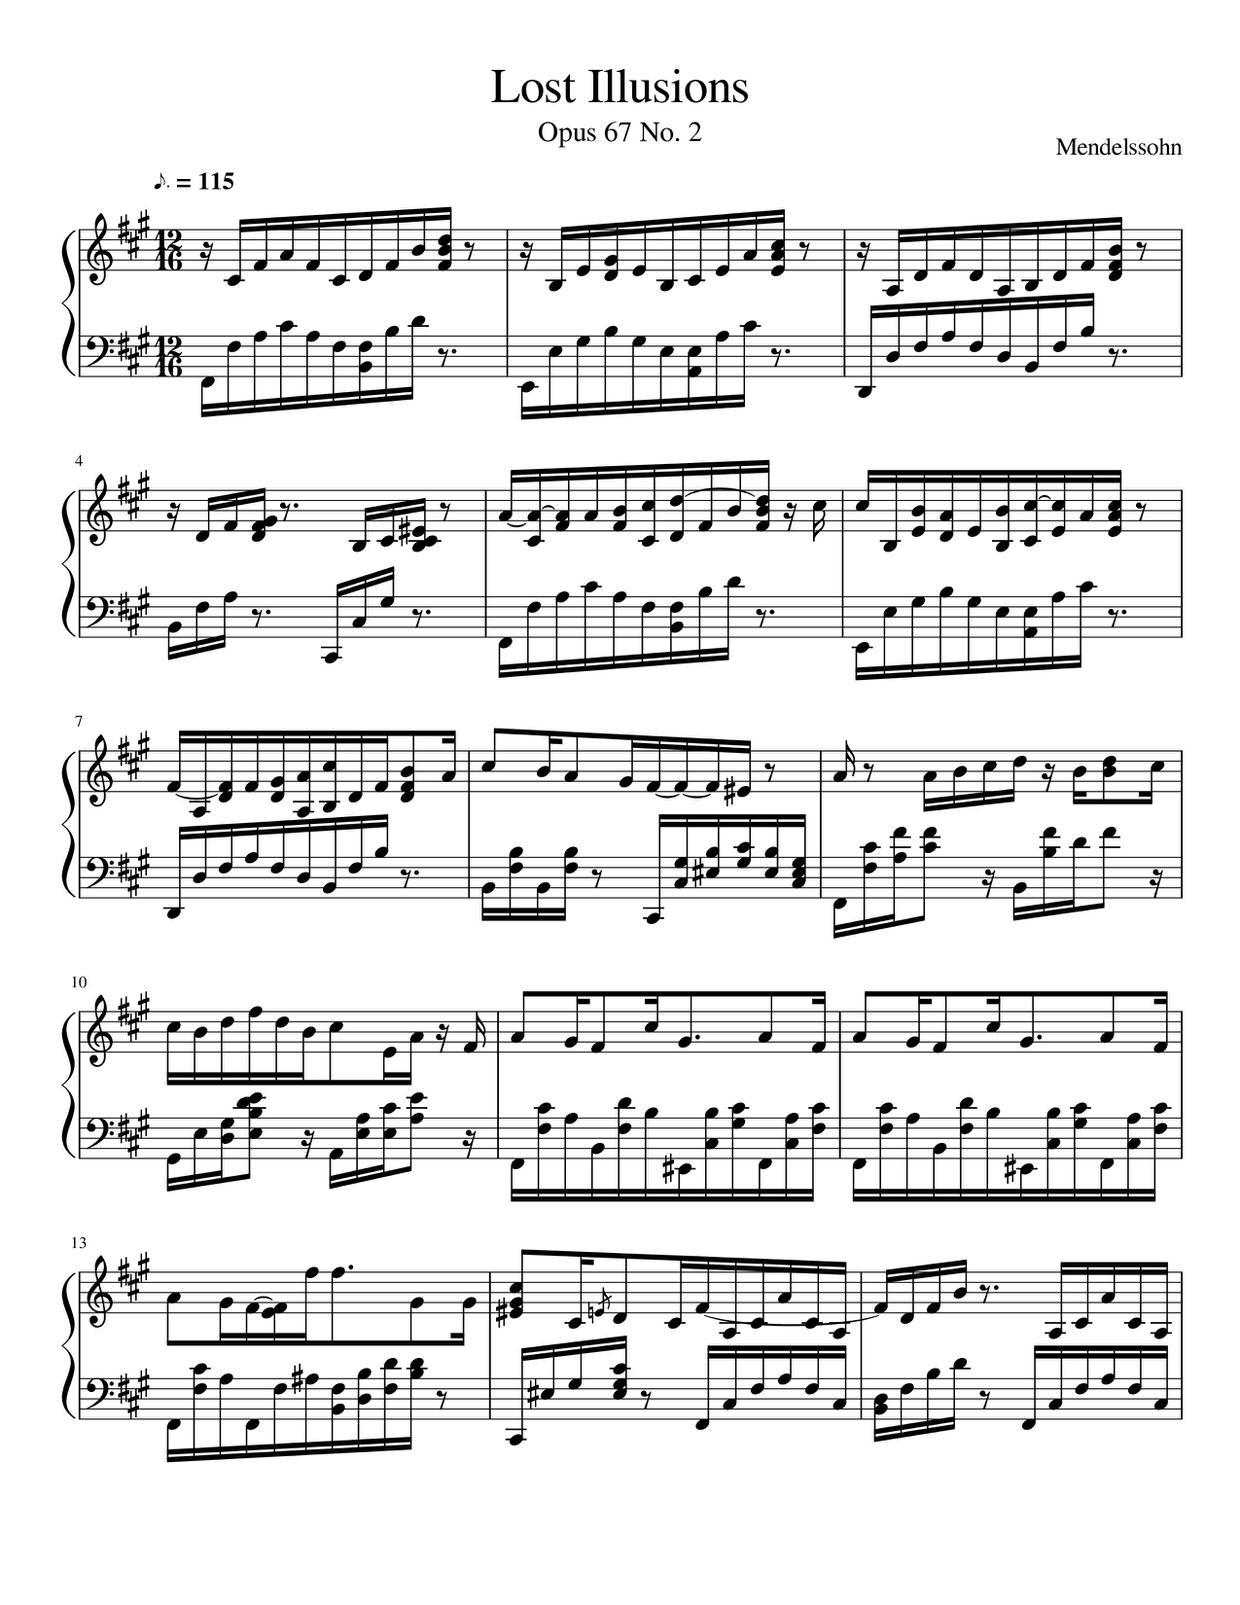 Songs Without Words, Book VI Opus 67: No. 2 in F-Sharp Minor琴谱